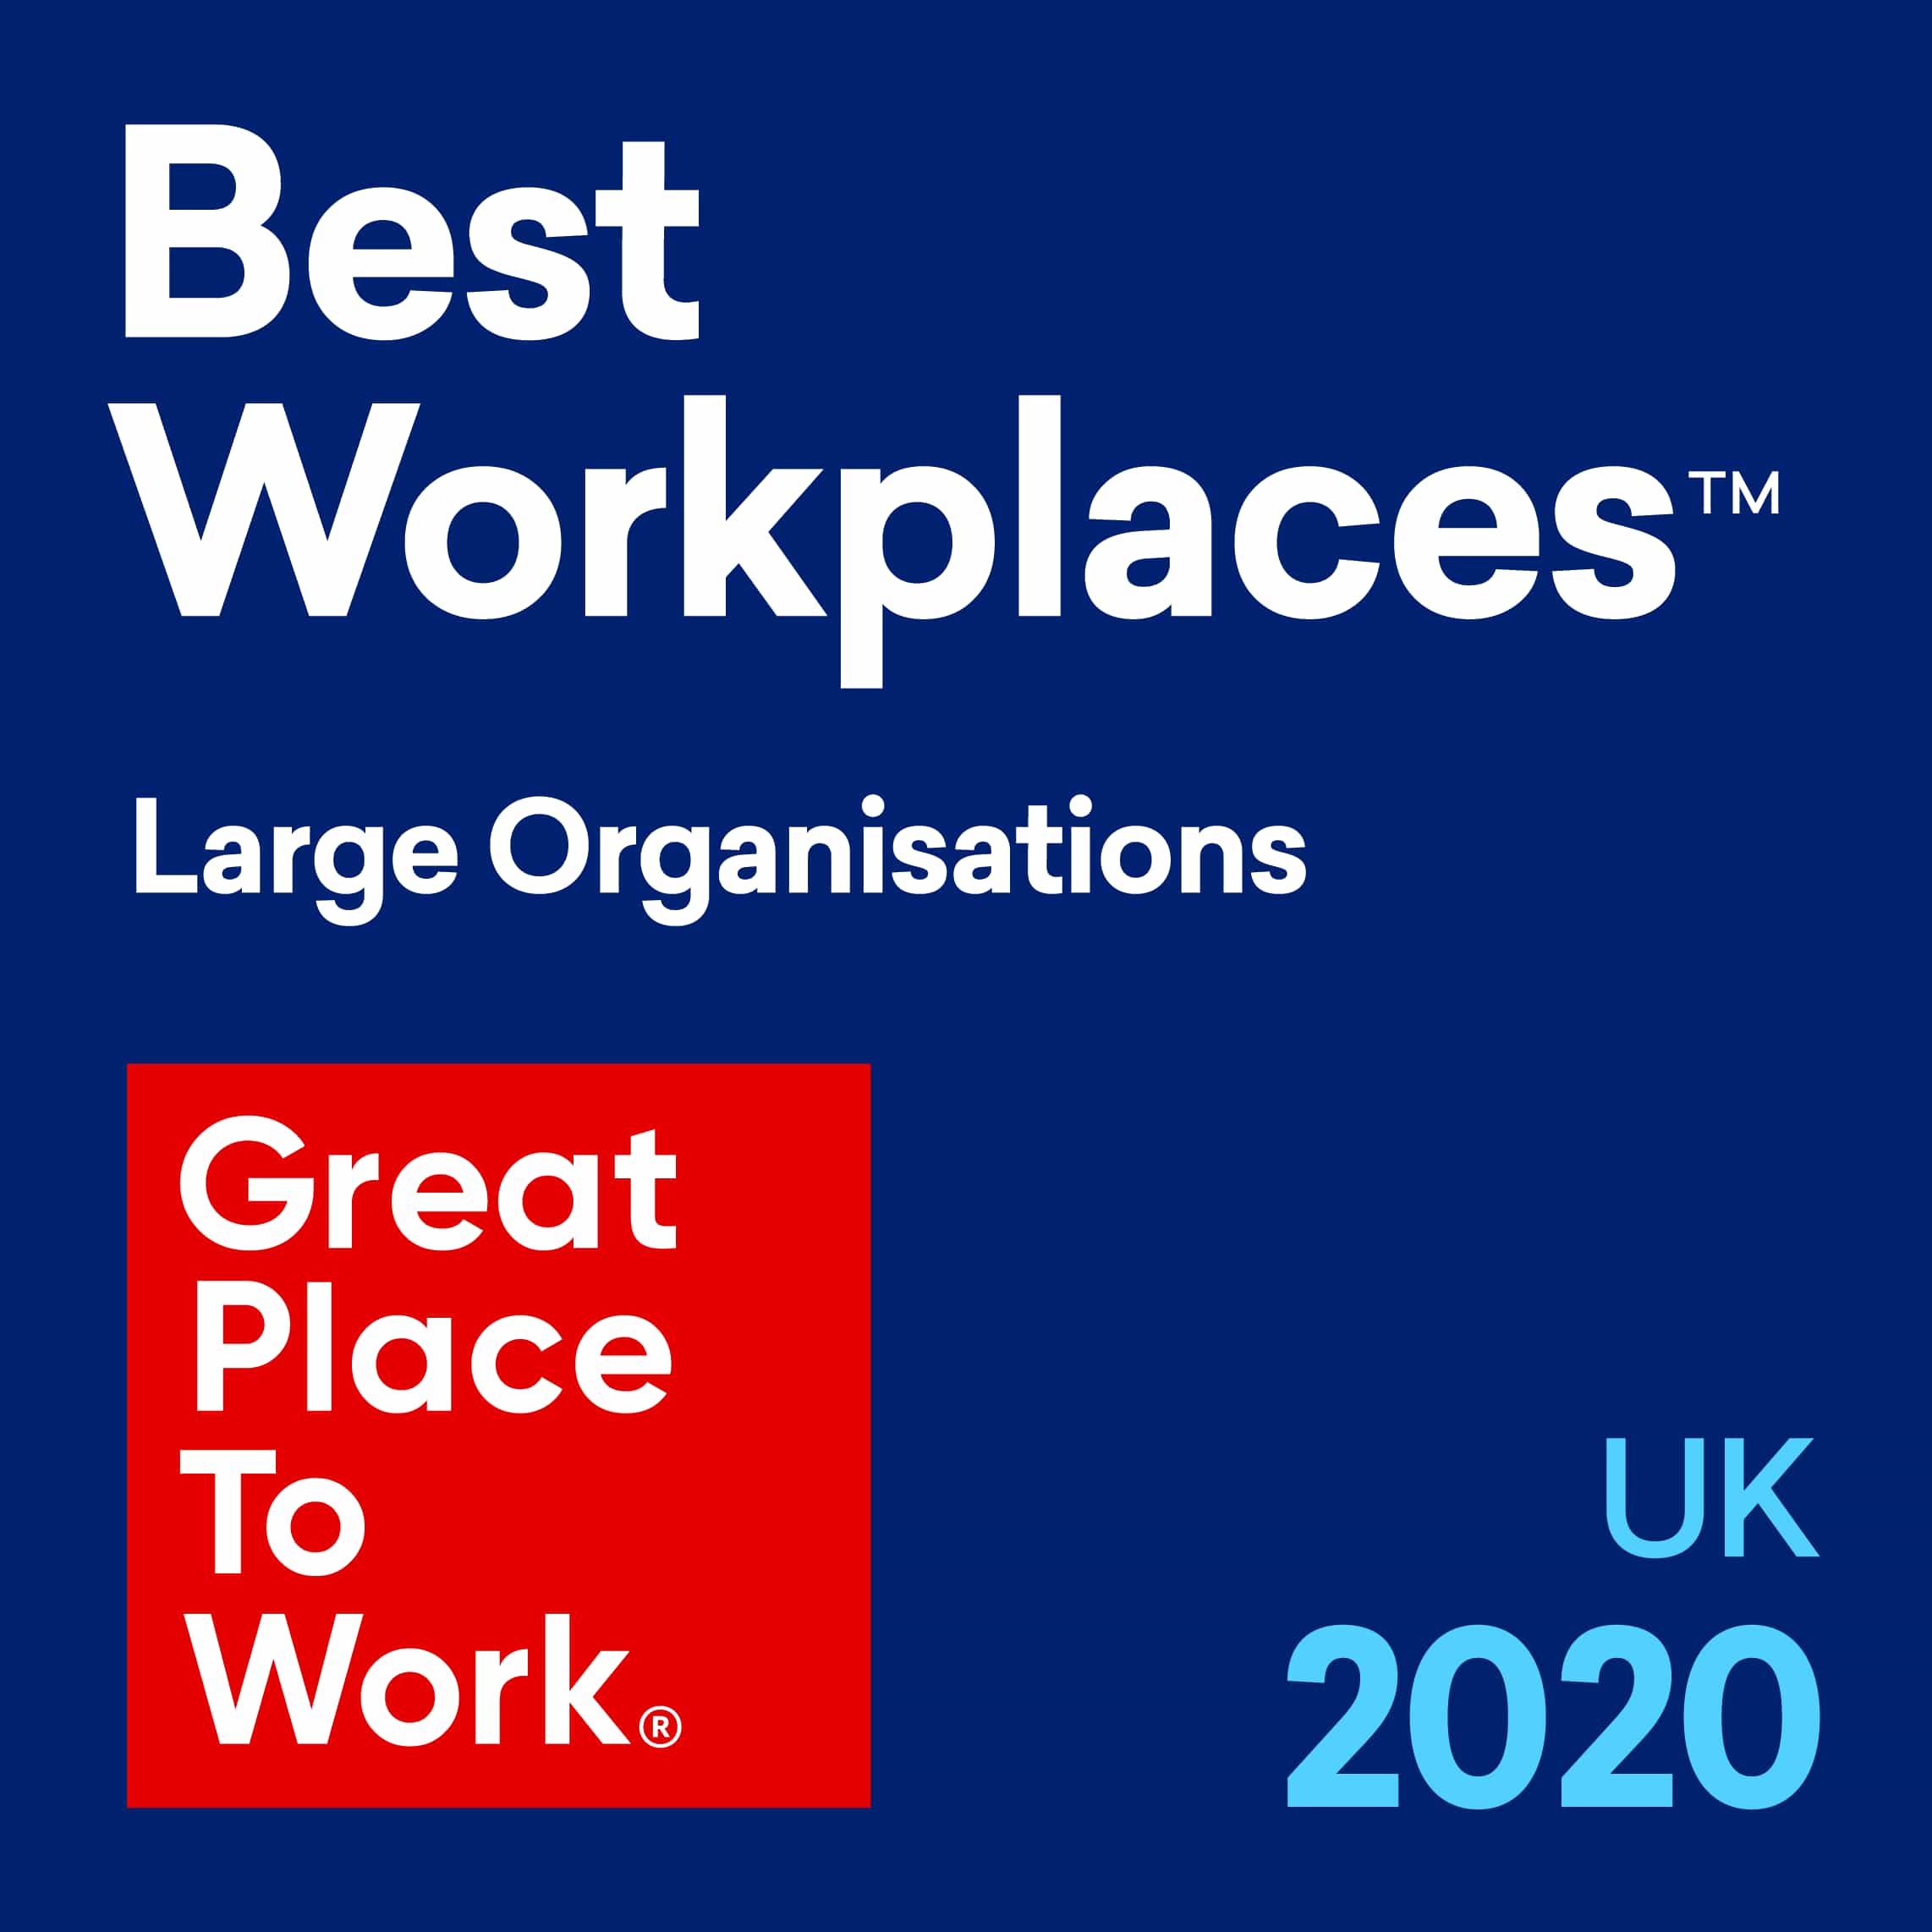 Great Place To Work - Large Organisations UK 2020 badge